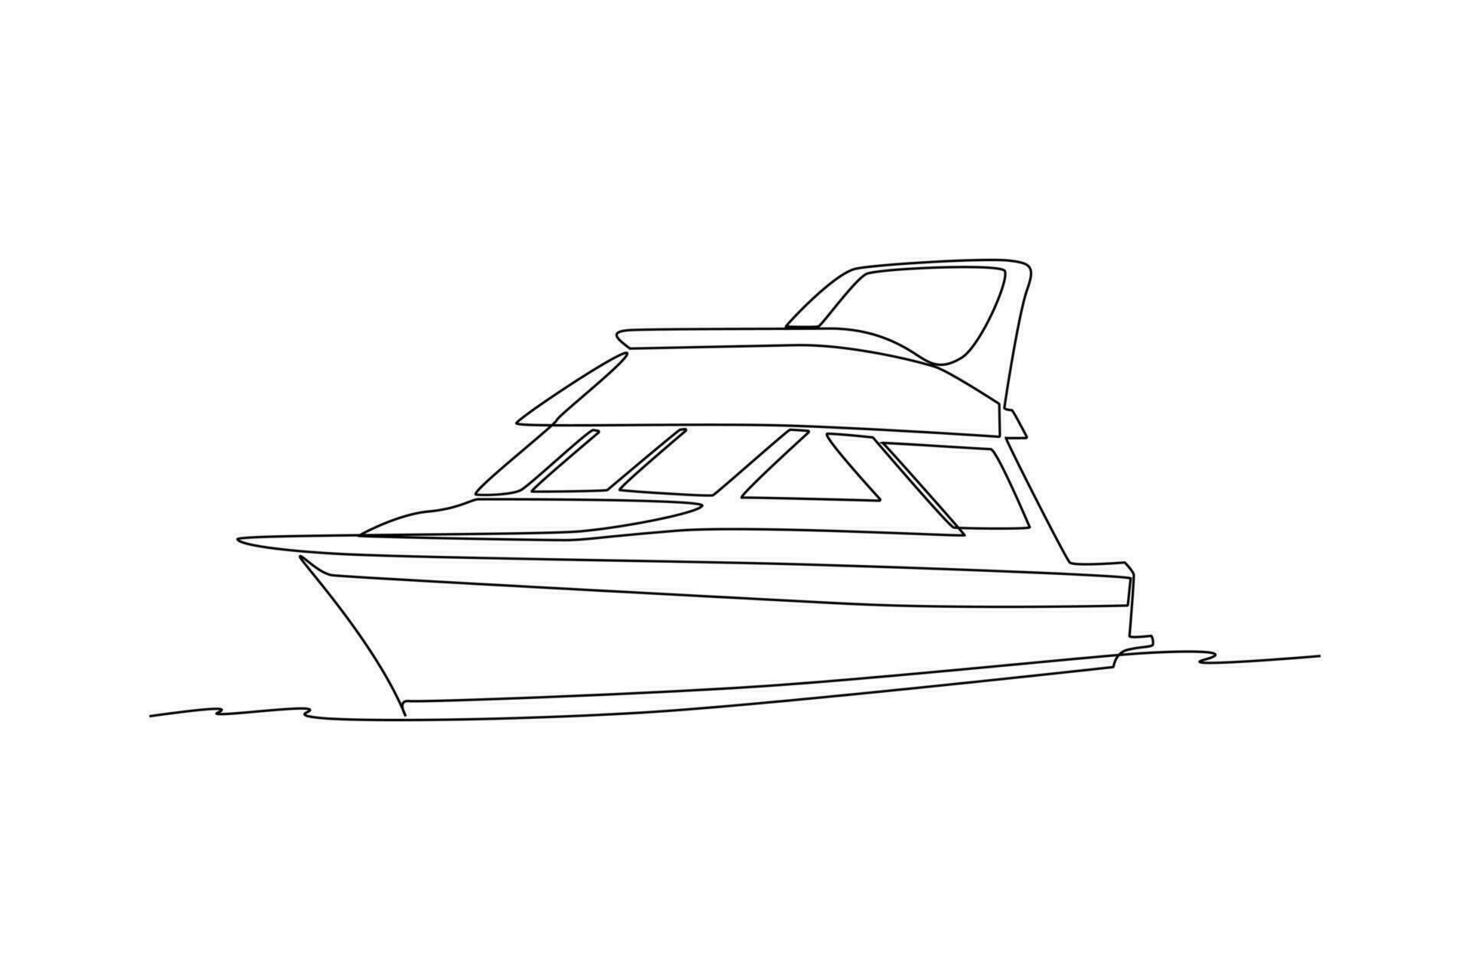 Continuous one line drawing Ocean travel transportation concept. Single line draw design vector graphic illustration.